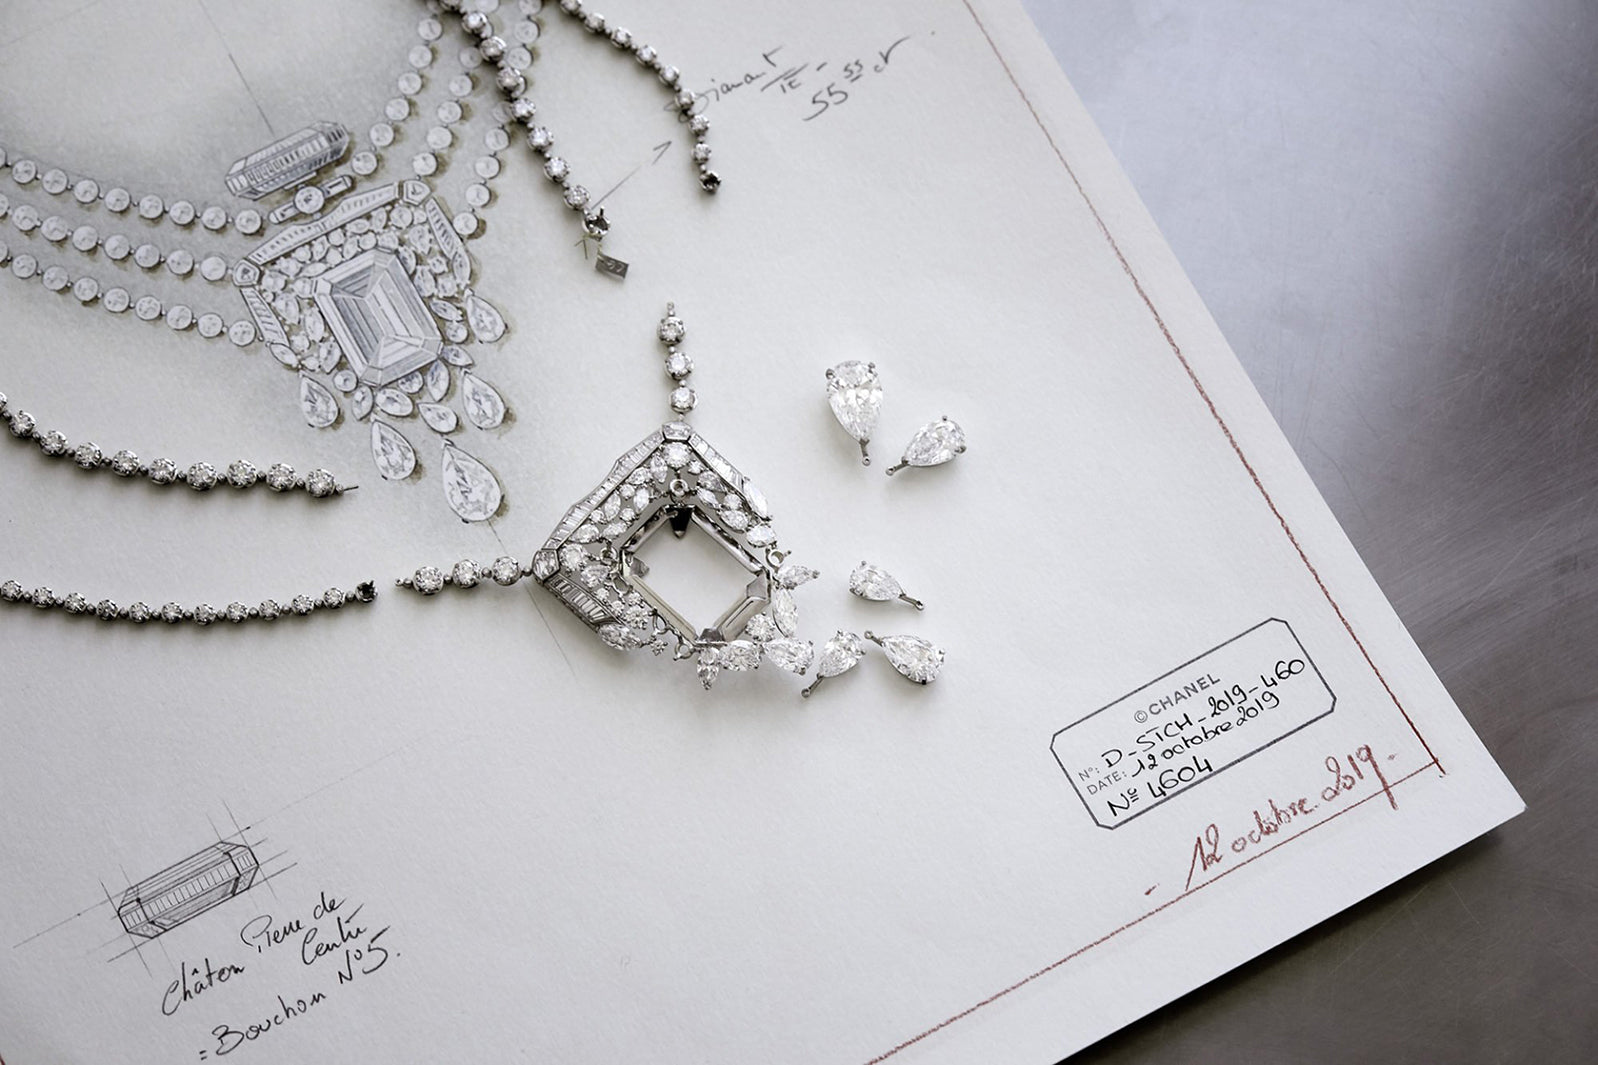 Chanel designs a 55.55-carat diamond necklace for the 100th anniversary of  its N°5 perfume